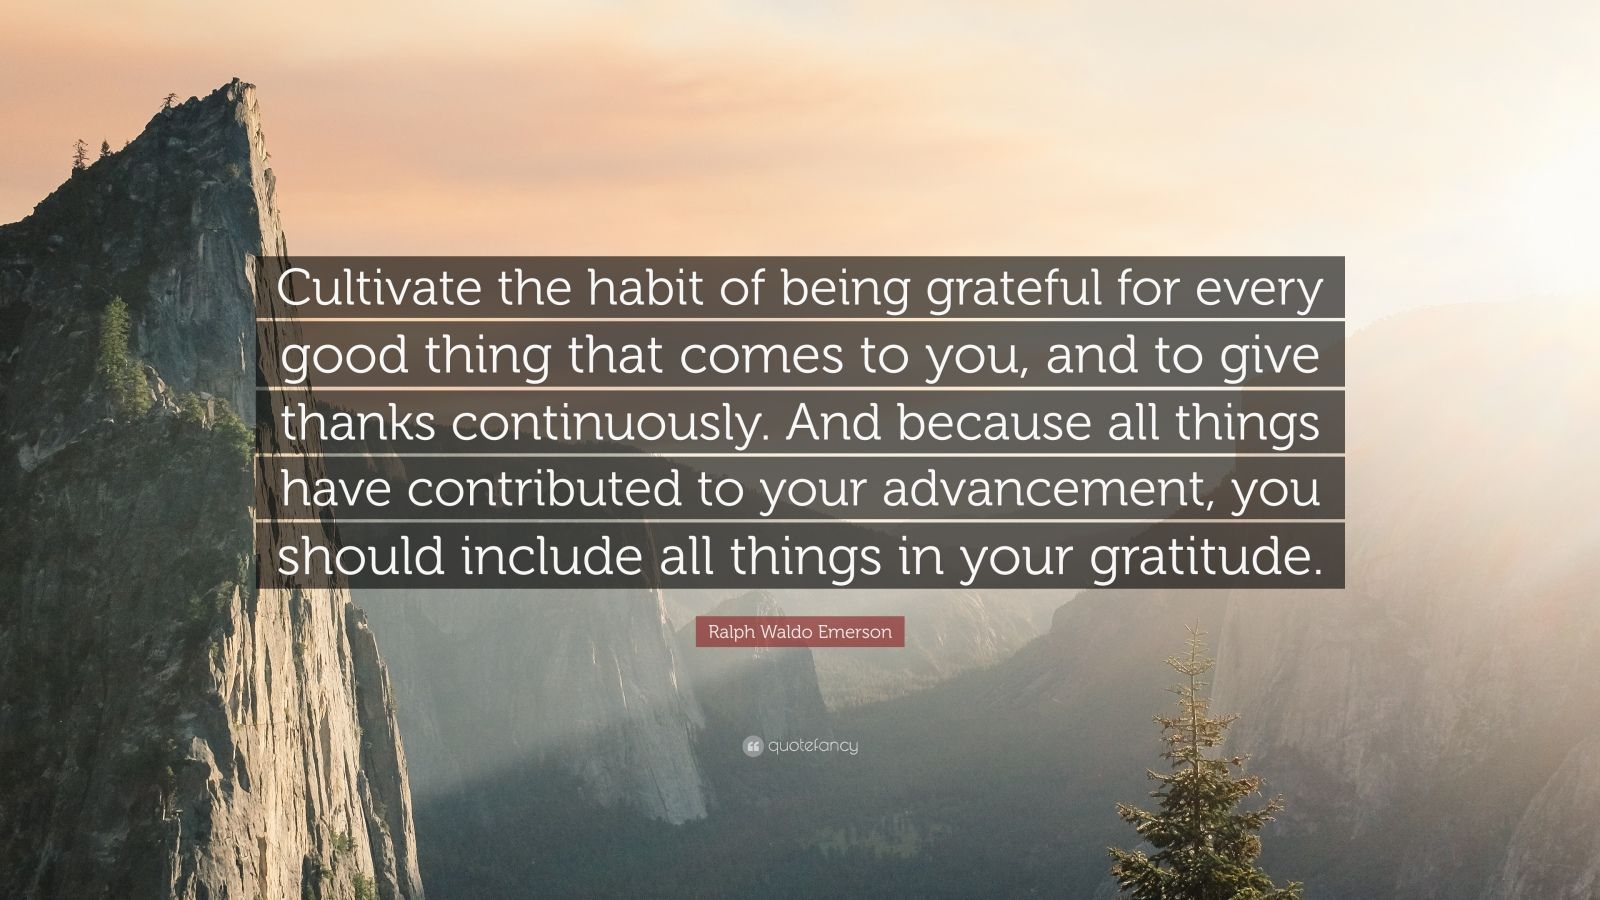 Ralph Waldo Emerson Quote: “Cultivate the habit of being grateful for ...